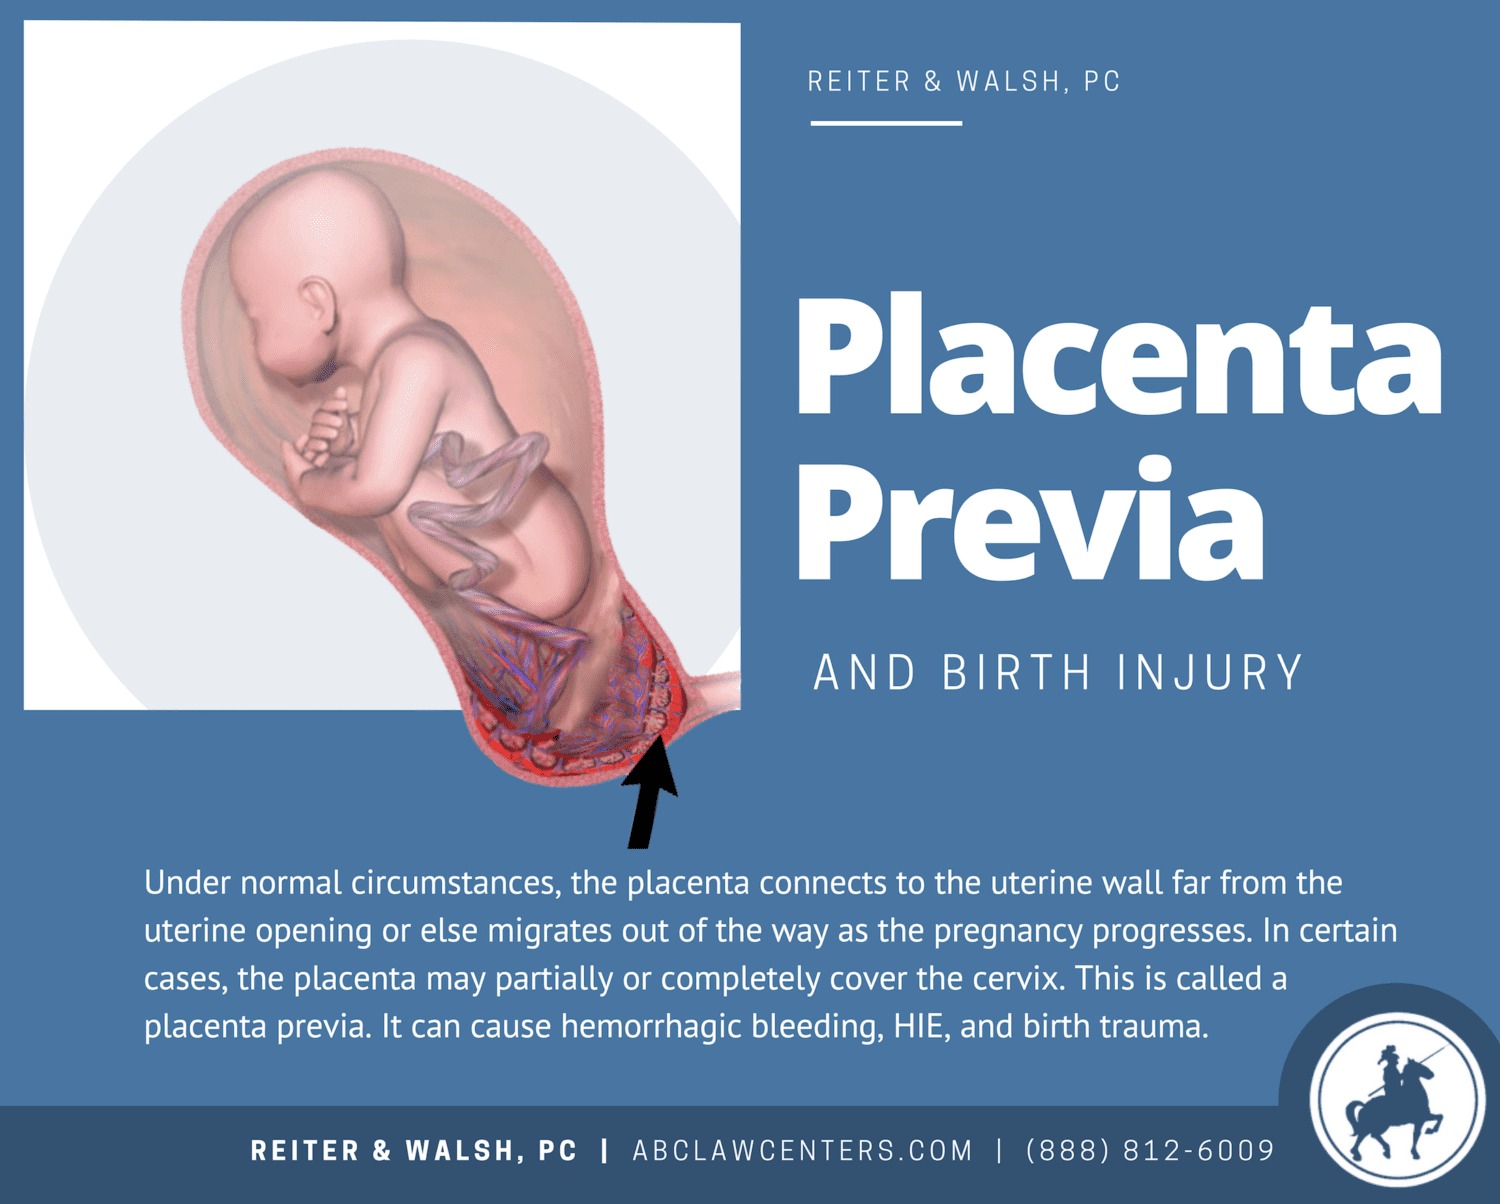 An illustration of a baby in the womb experiencing placenta previa